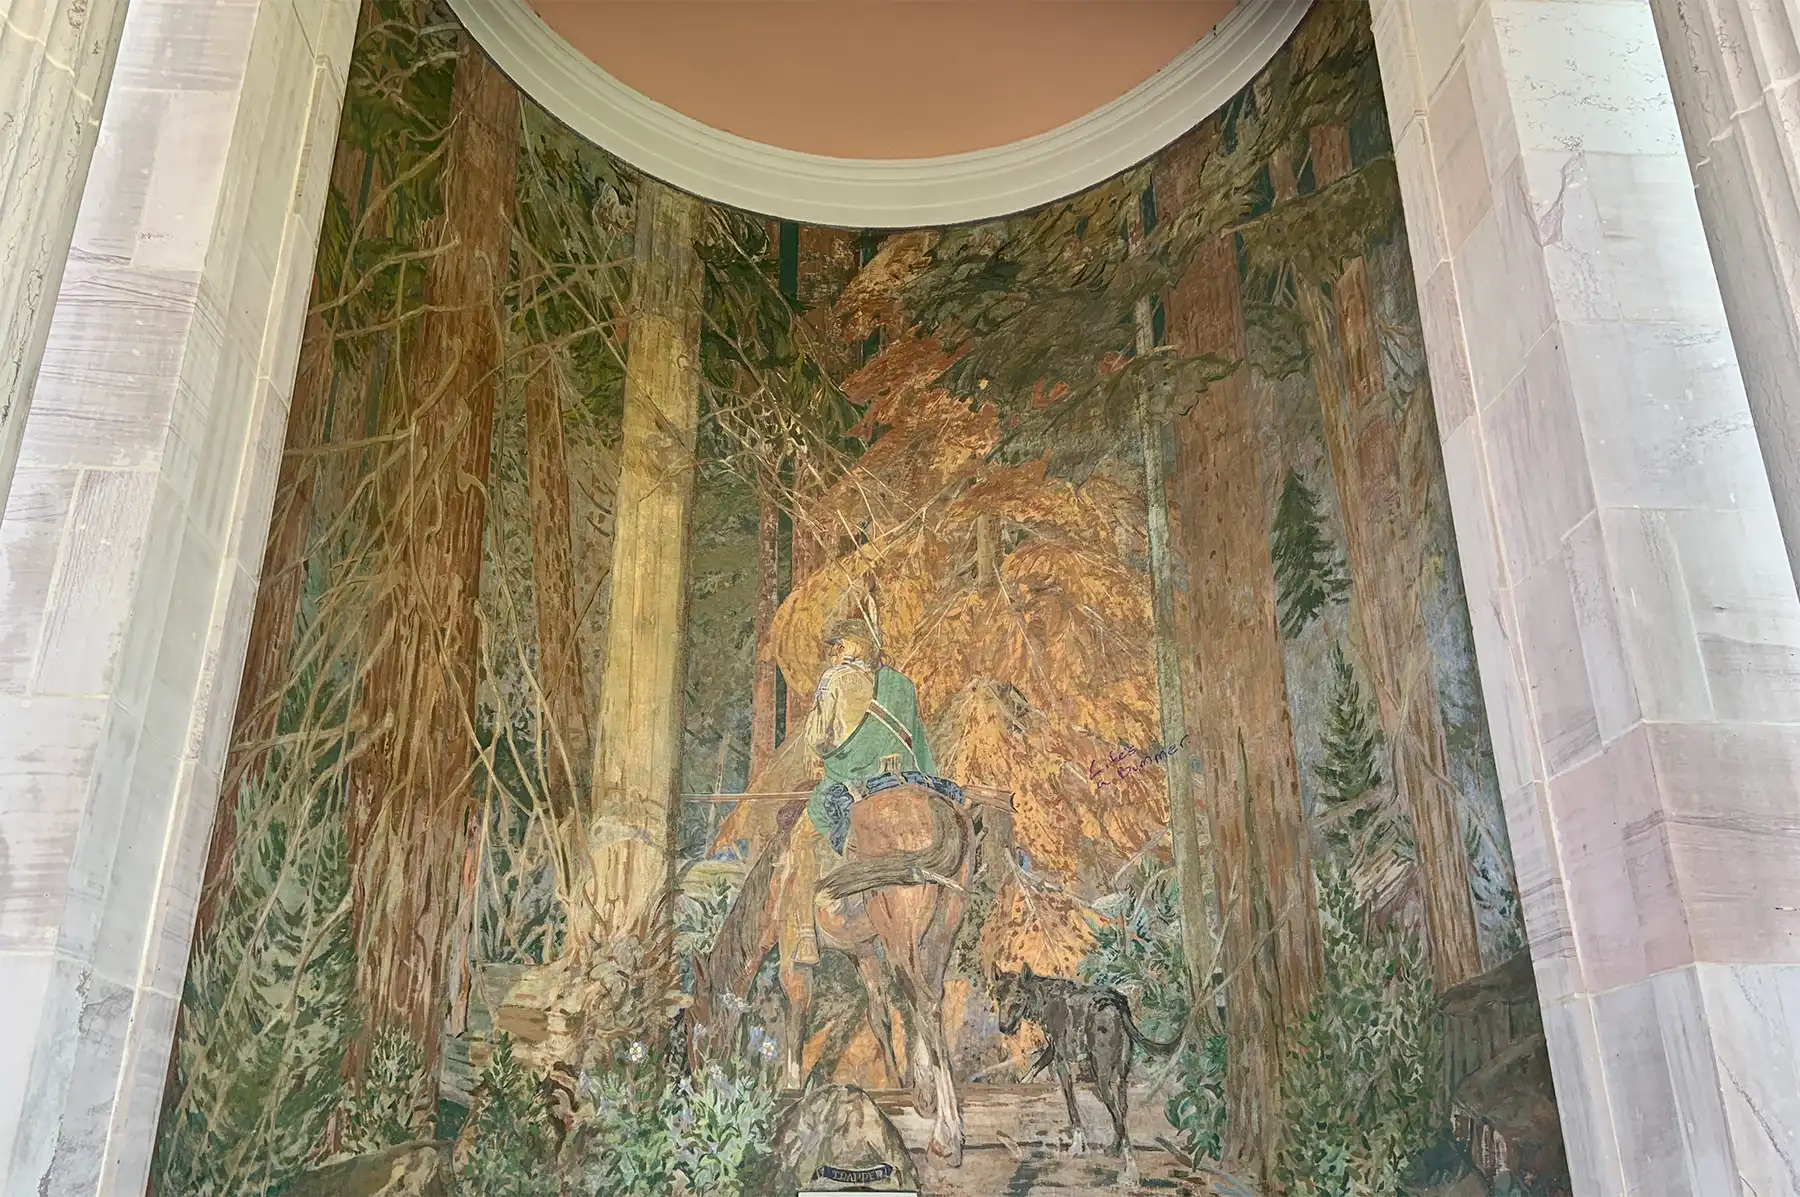 Painting in greens, browns, and gold features a man riding a horse away from us, while turning to look back at the viewer.